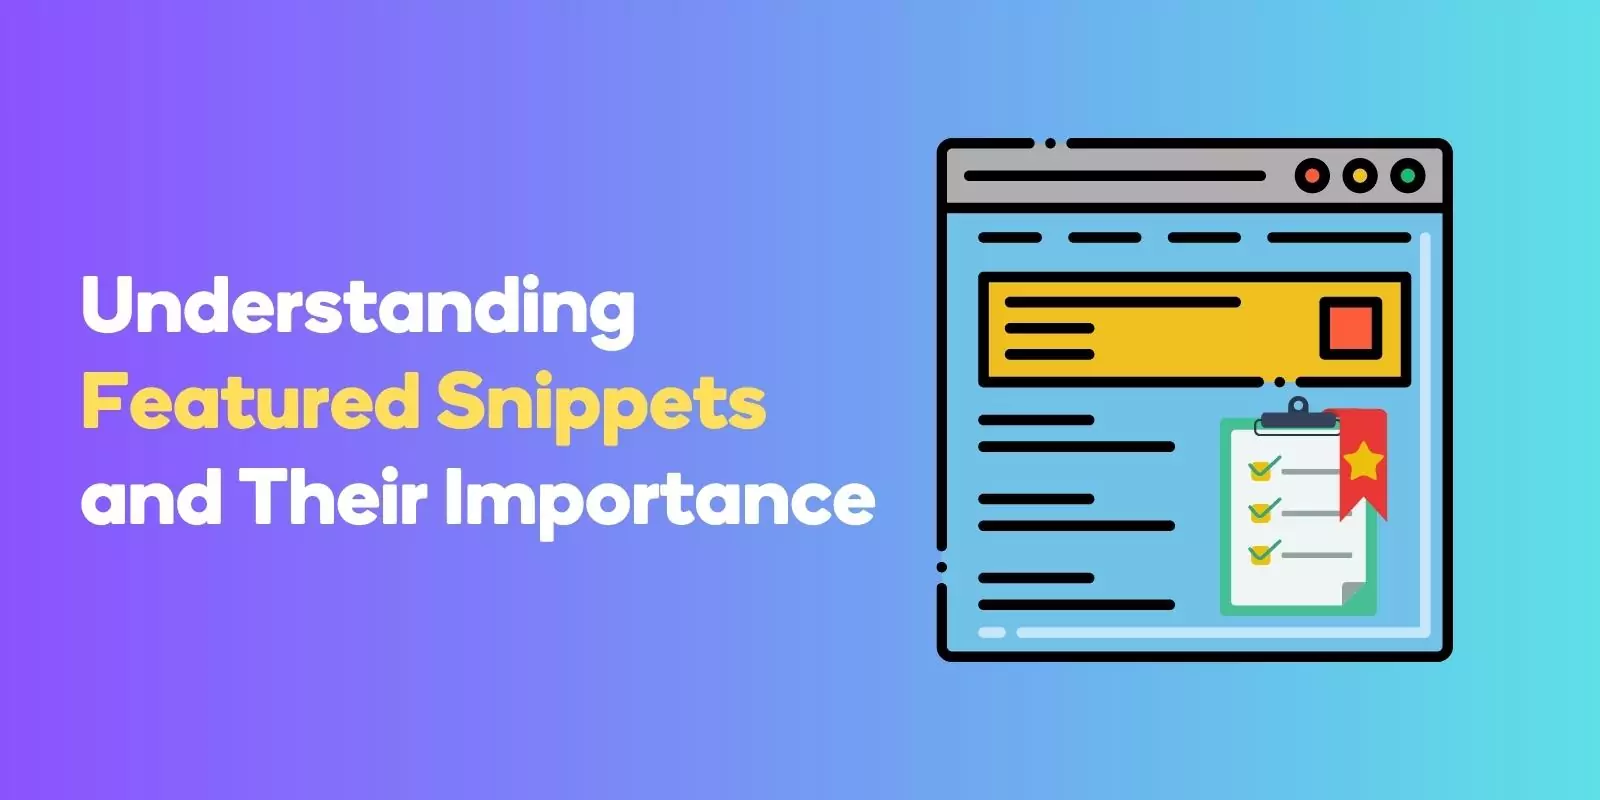 Understanding Featured Snippets and Their Importance